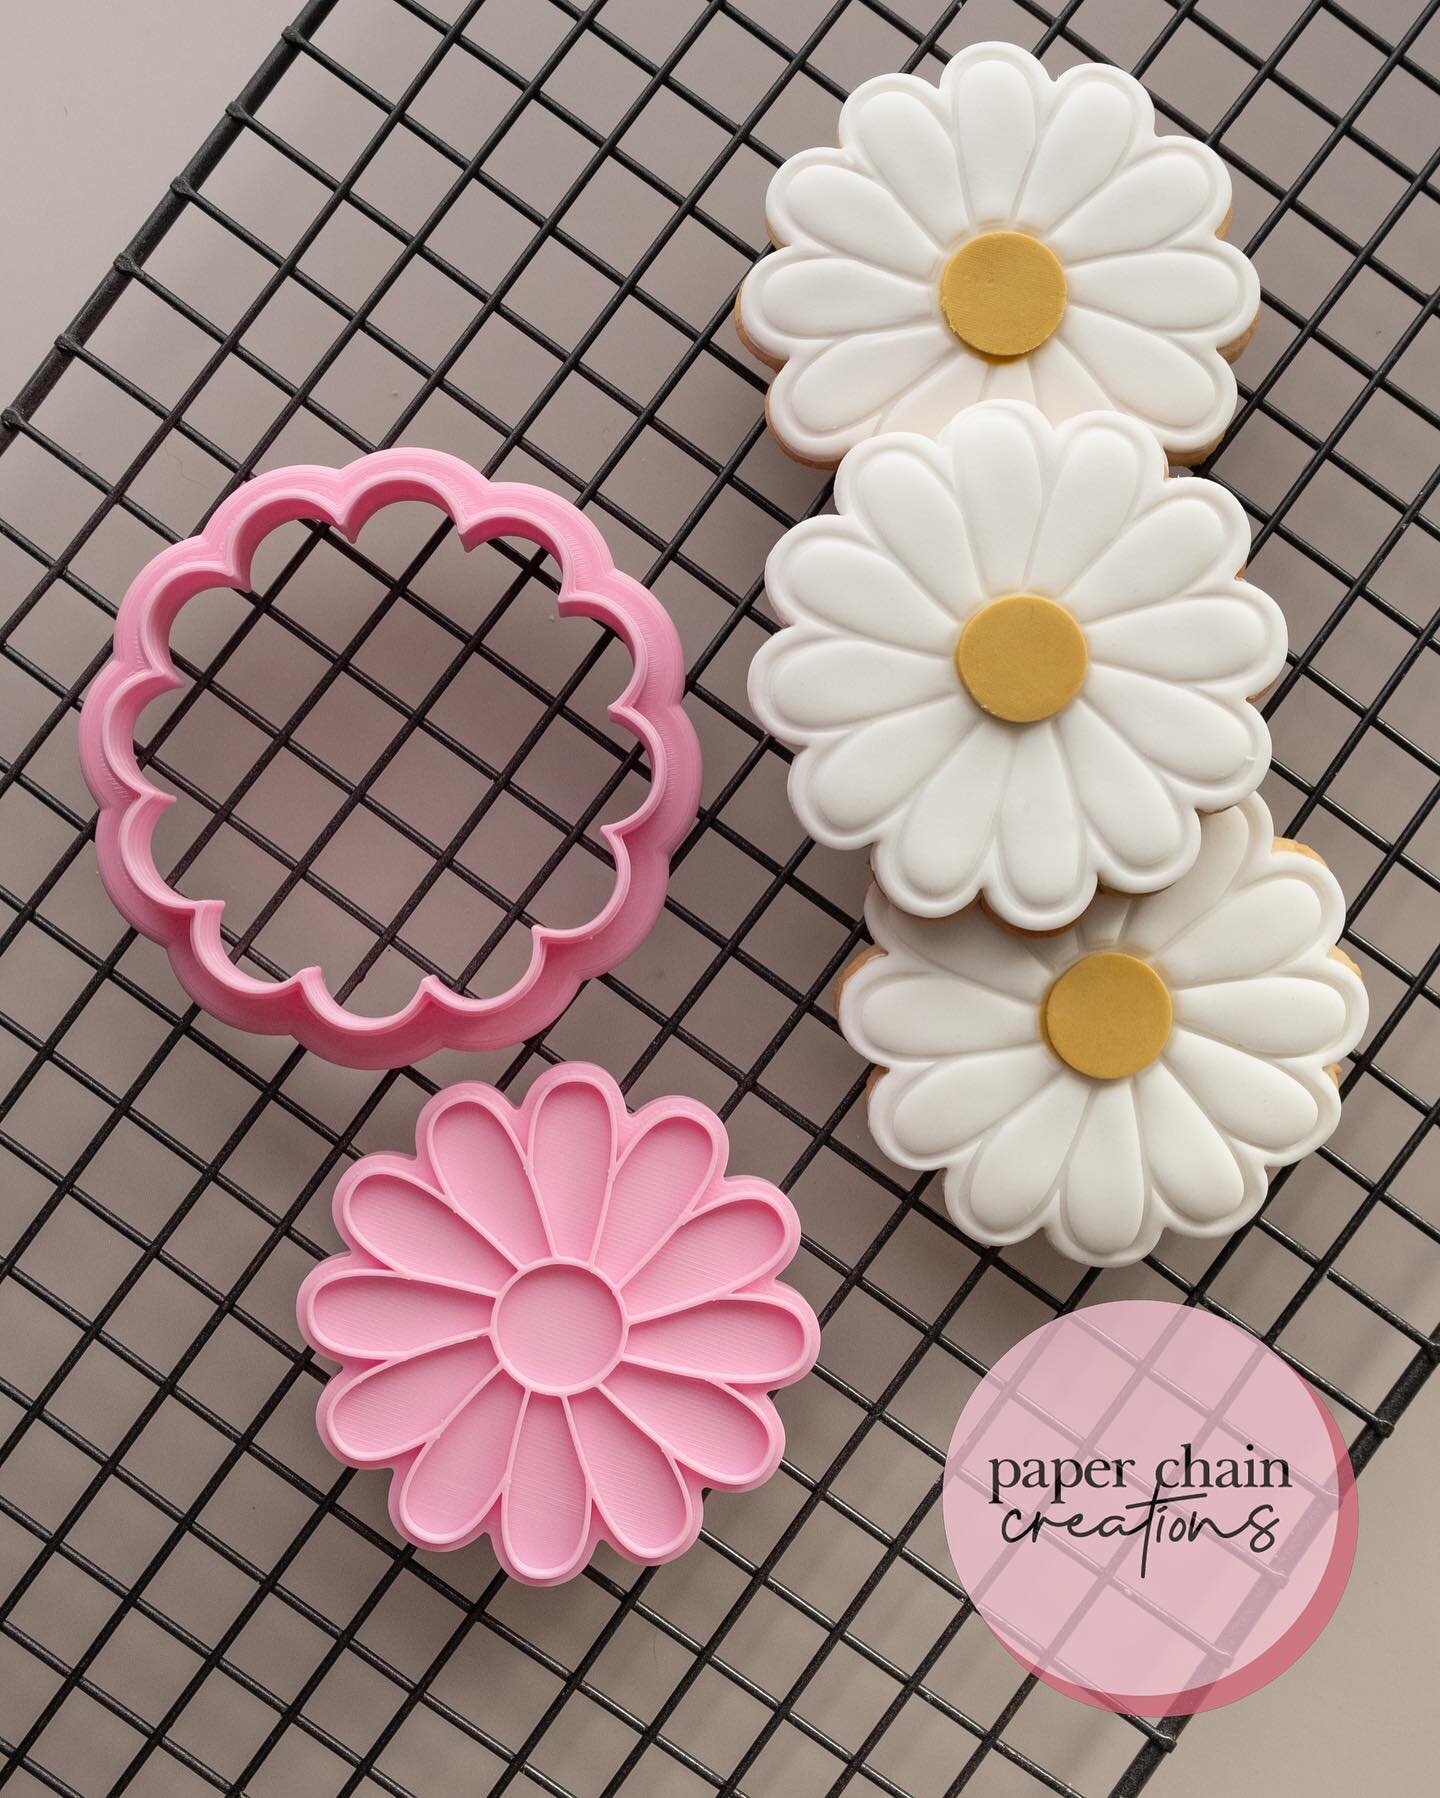 💕twelve petal daisy💕
.
You can never have too many flowers! Perfect for Mother&rsquo;s Day. 
.
Speaking of Mother&rsquo;s Day my new range of Mother&rsquo;s Day cutters and embossers will be available on Friday! I might even have a cheeky sale comi